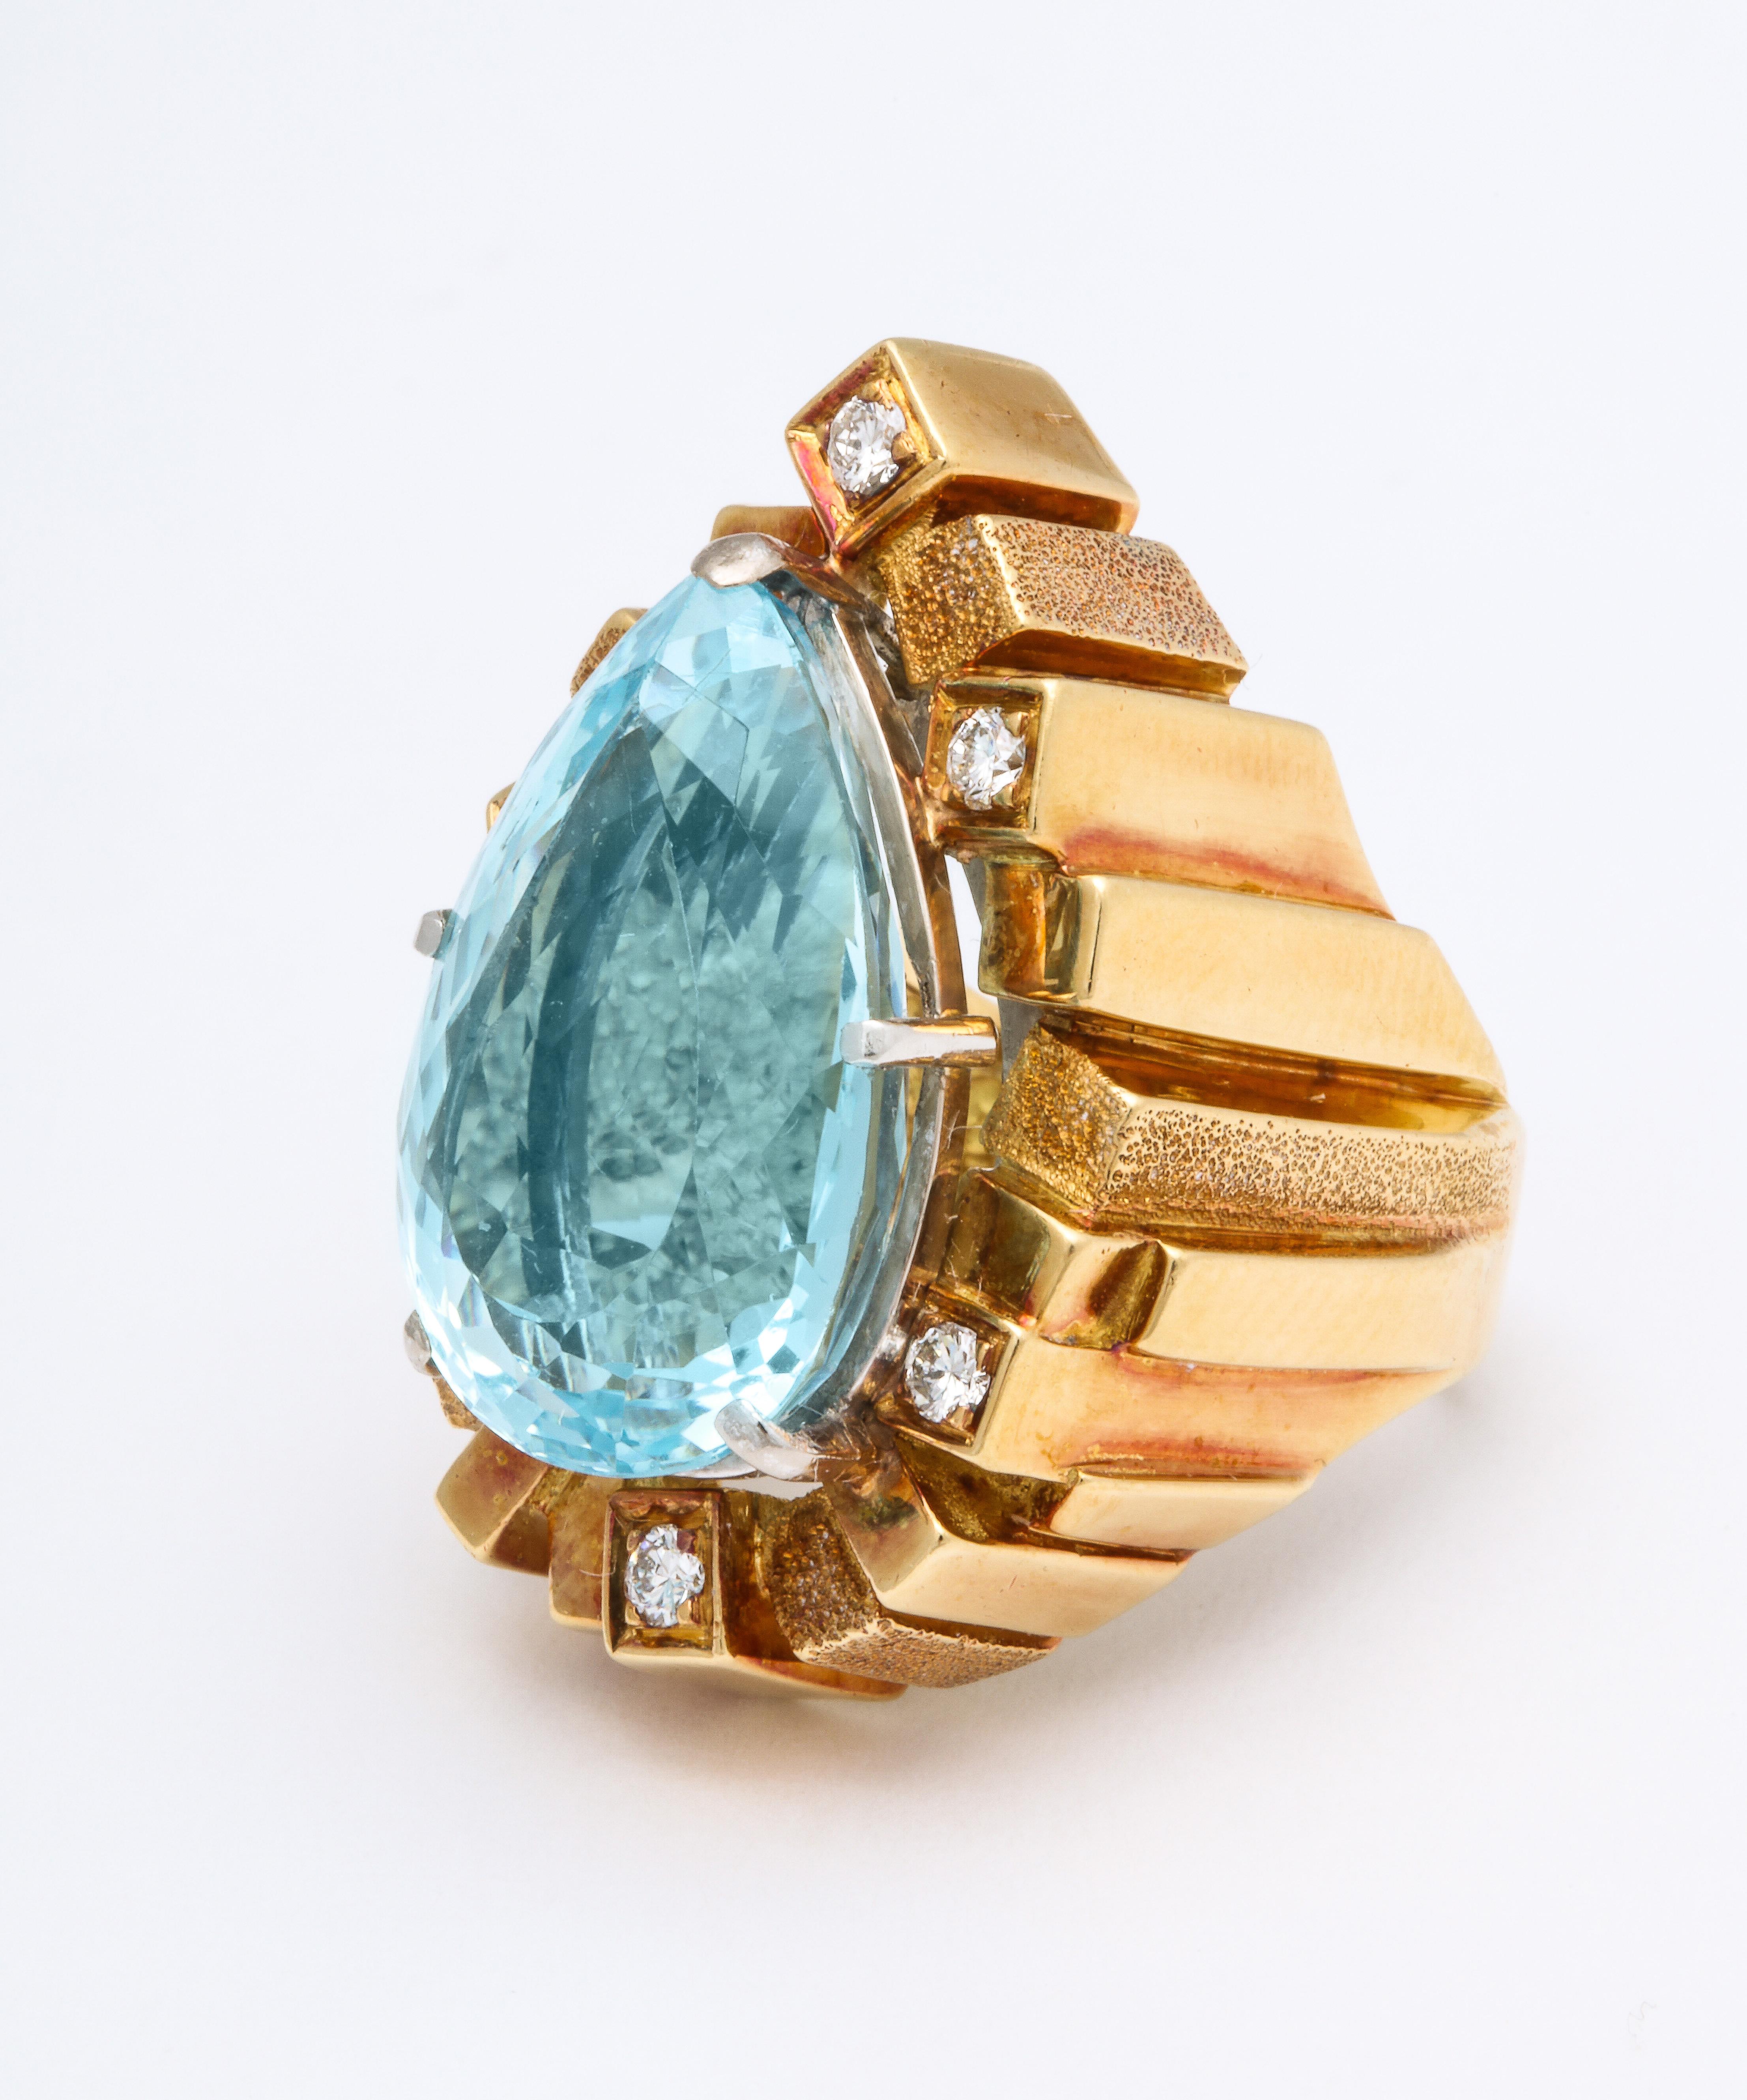 An exceptional design 18k mounting of a large pear shaped faceted Aquamarine with Diamonds set in gold cubes with ridges surrounding the Aquamarine. This rare piece is  hand made and  signed Henry Dunay fr.